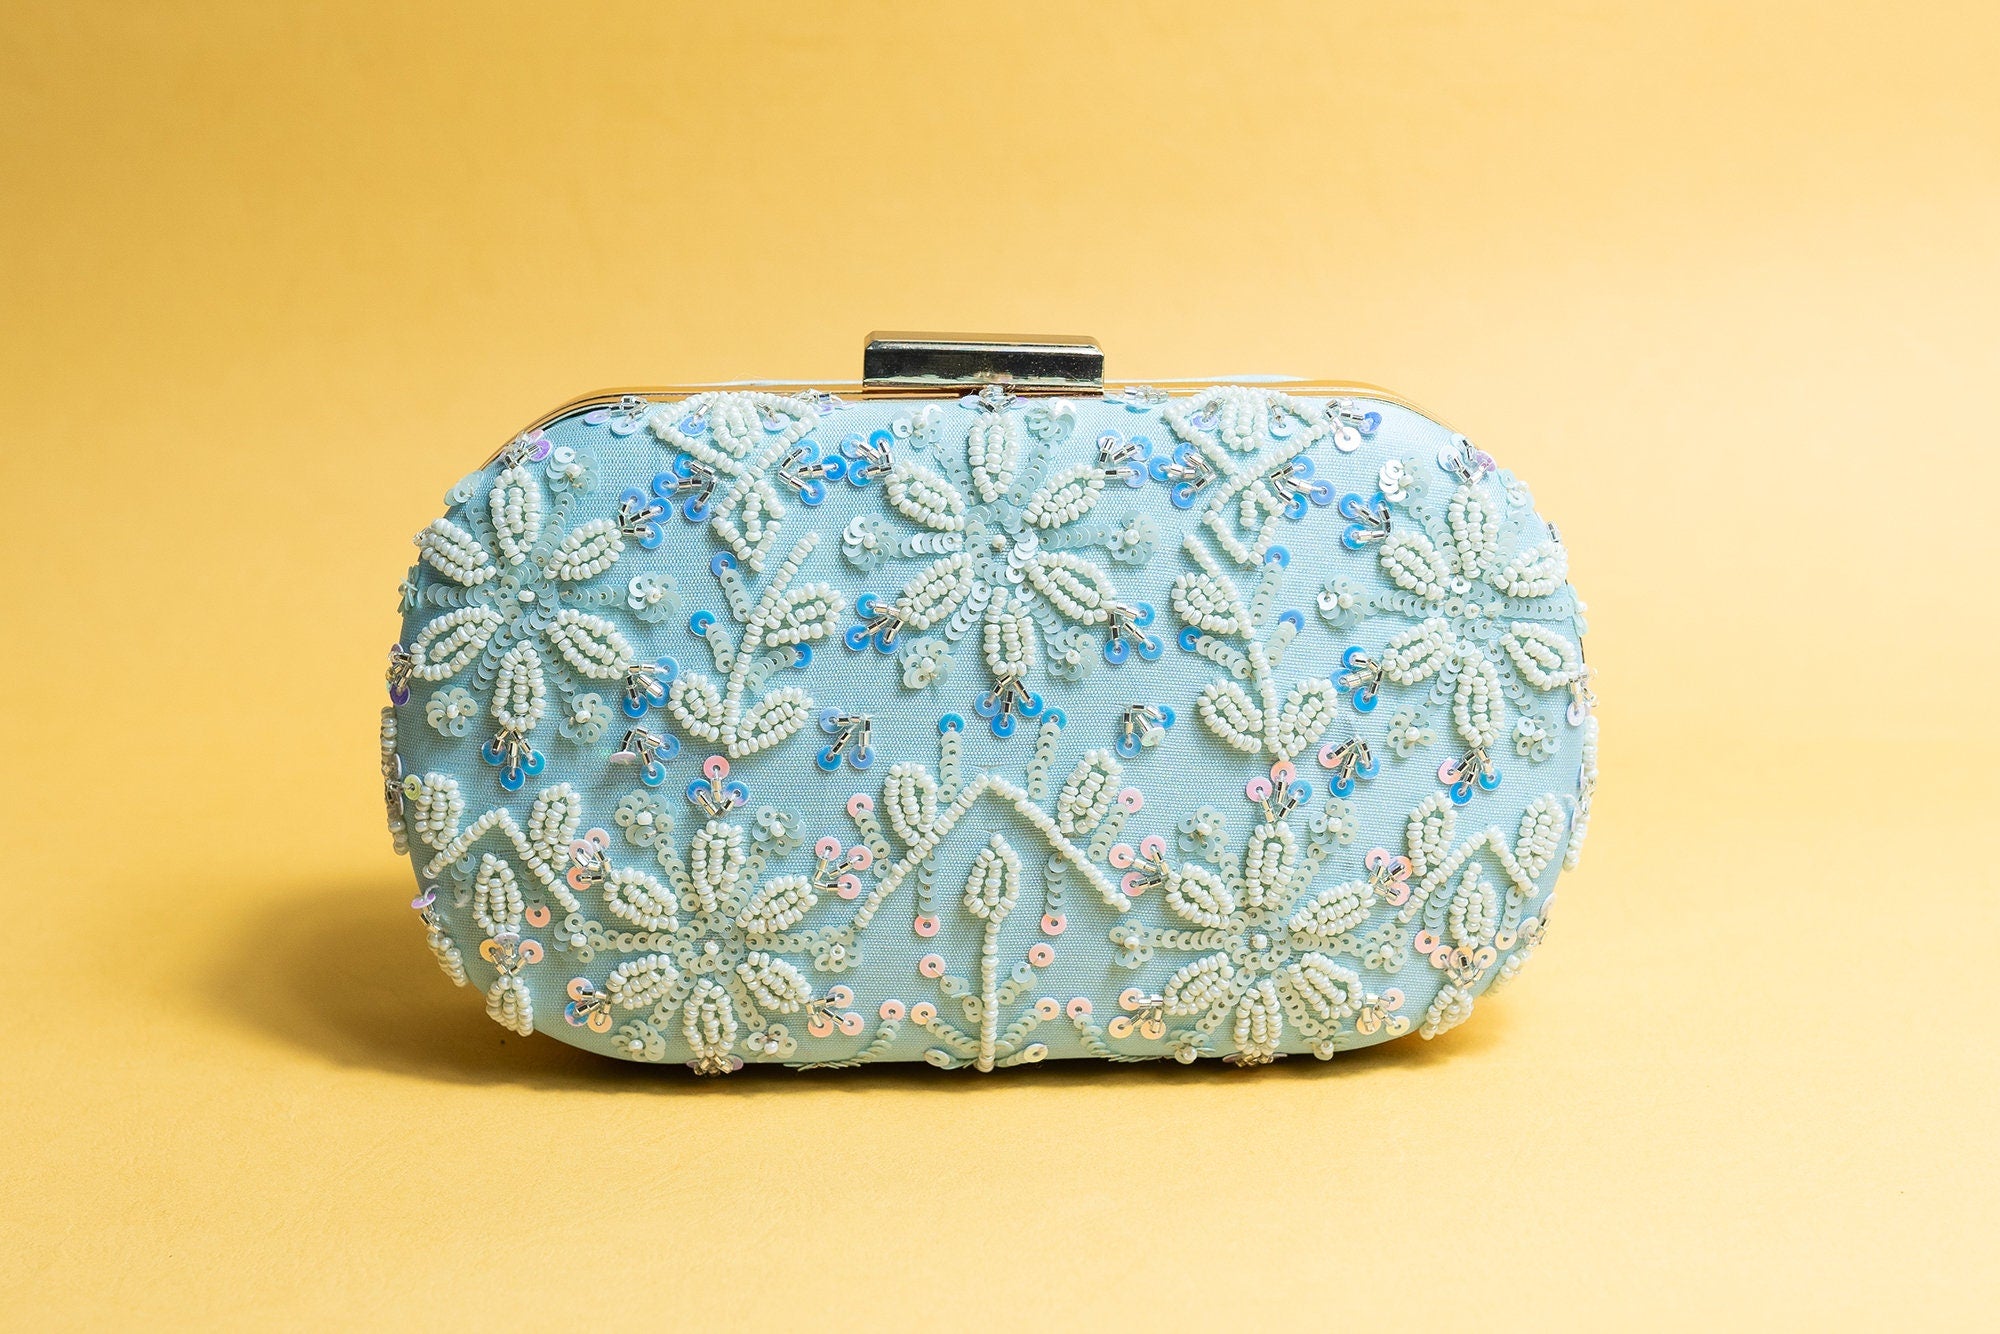 Light Blue silk clutch purse/bag, hand made embroidery clutch bag with detachable metal sling